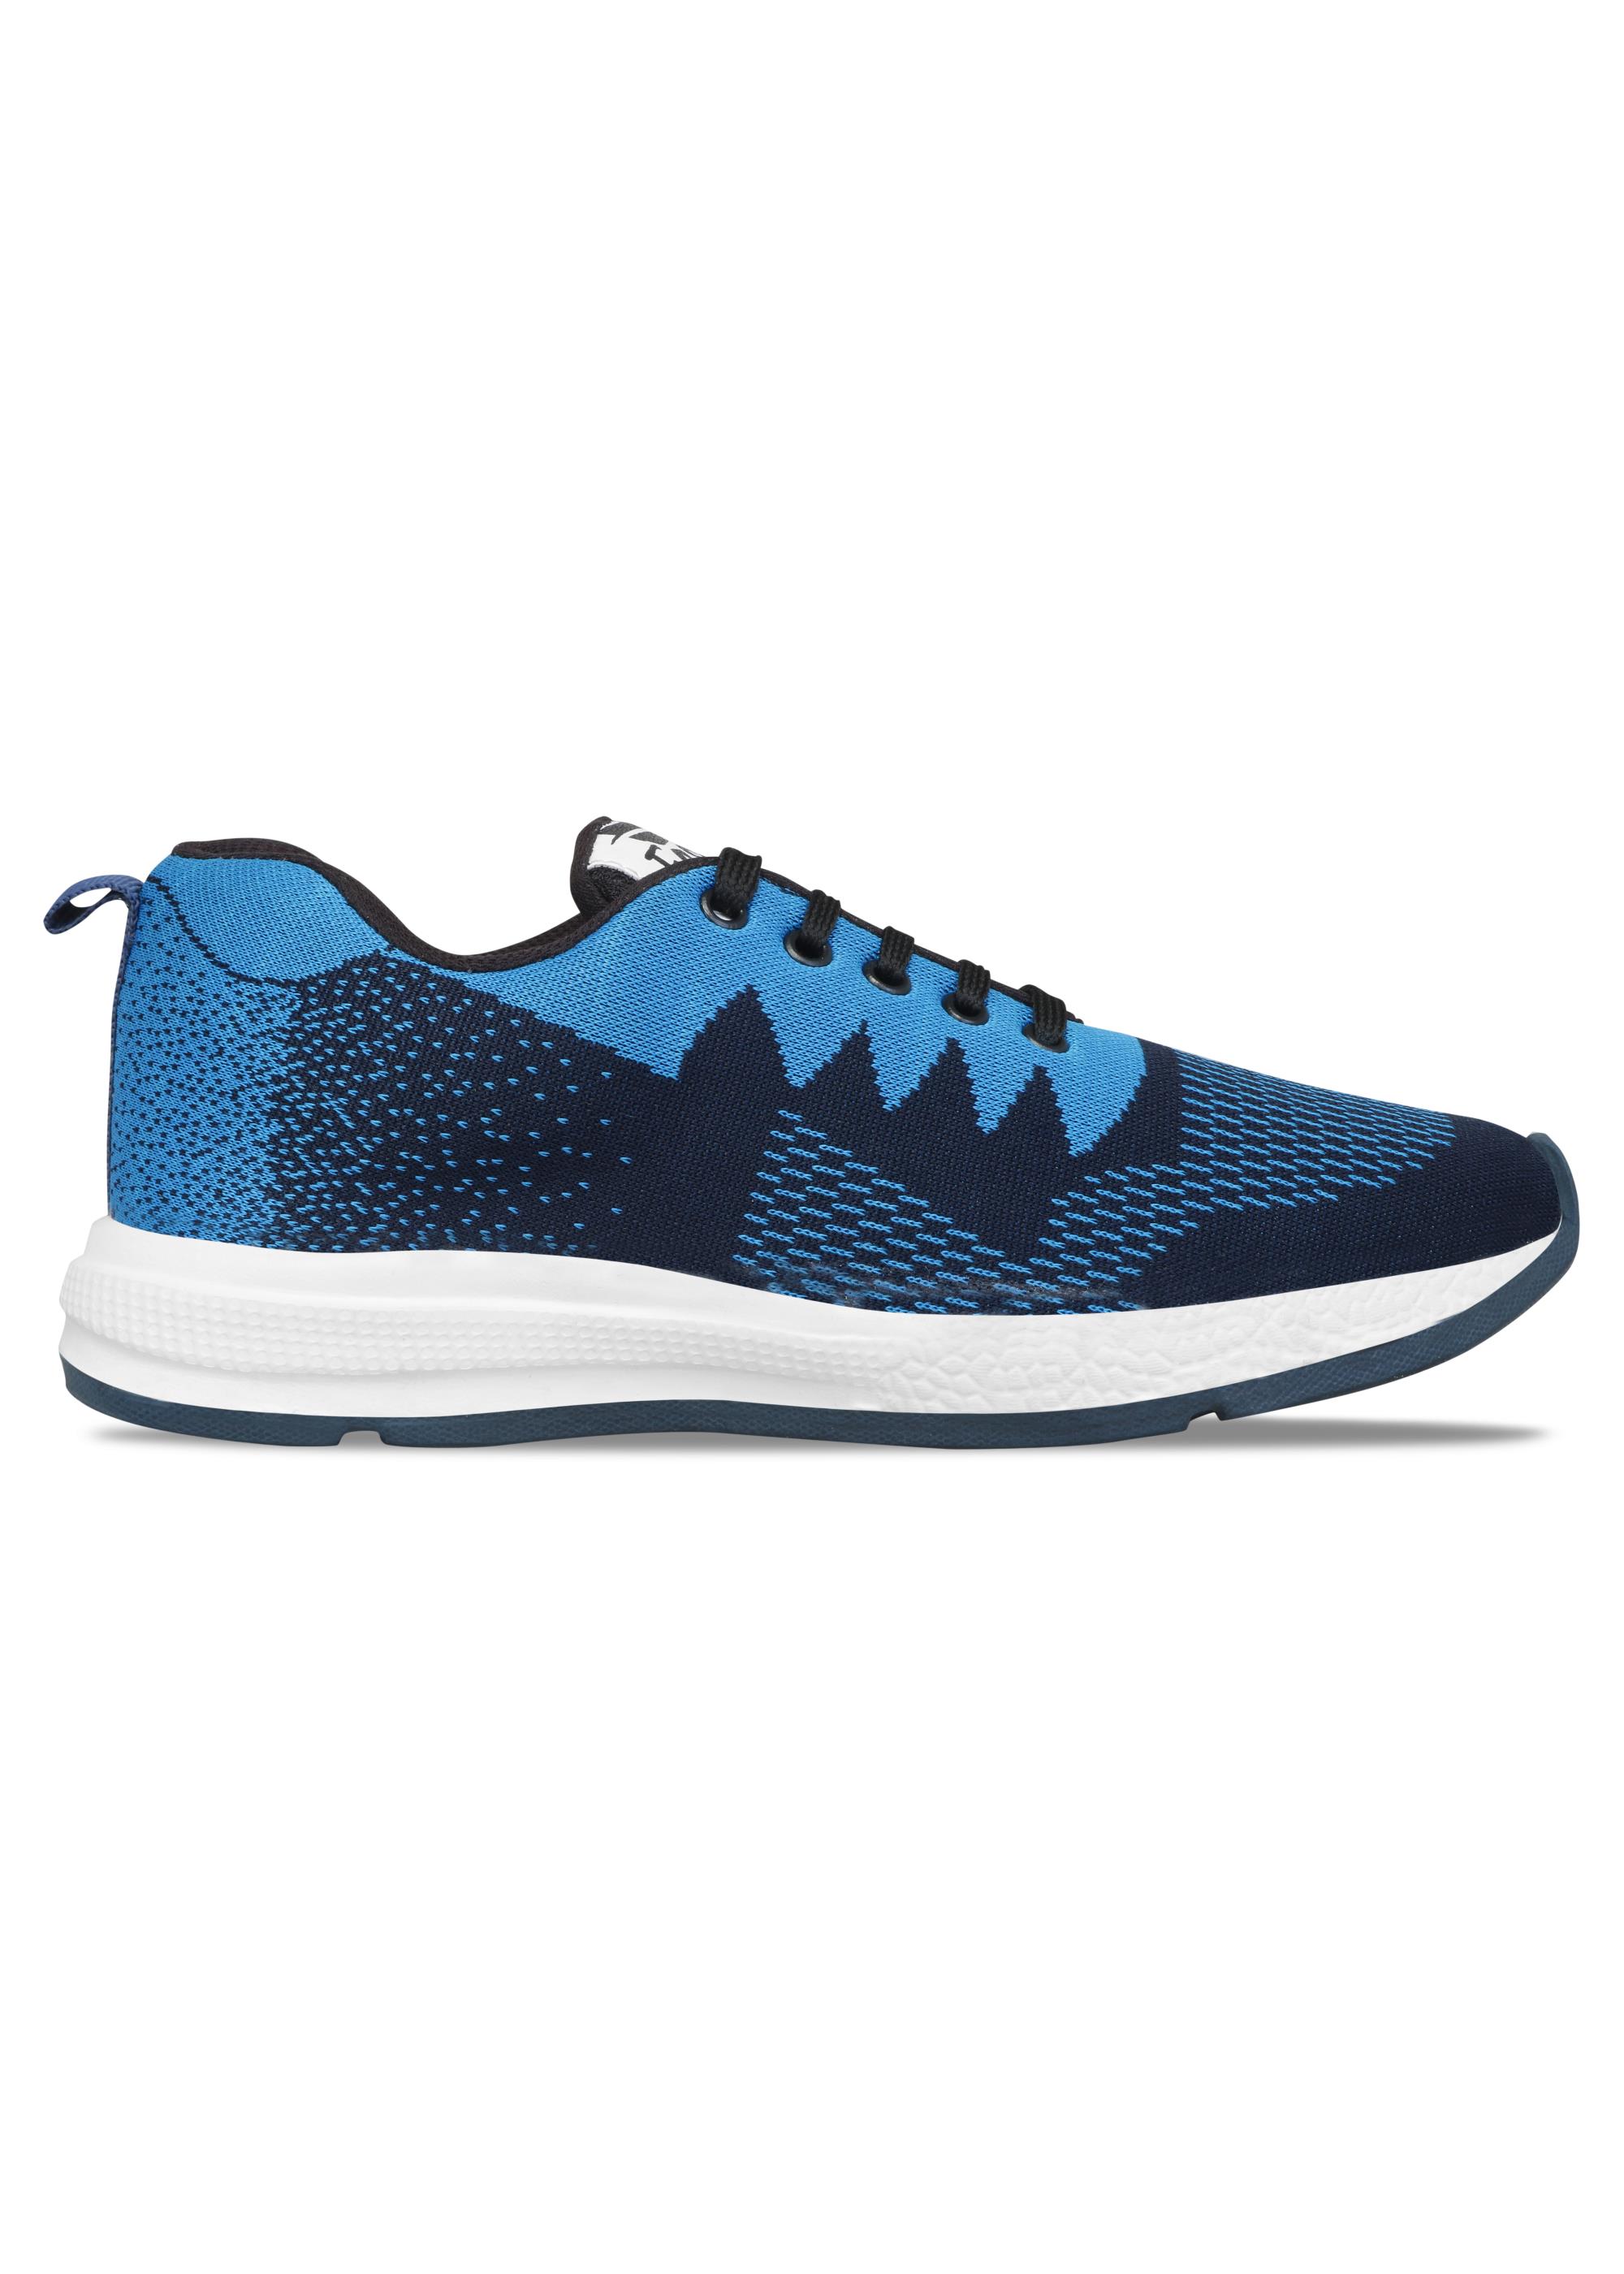 Buy Essence Running Shoes FOR Mens Online @ ₹499 from ShopClues